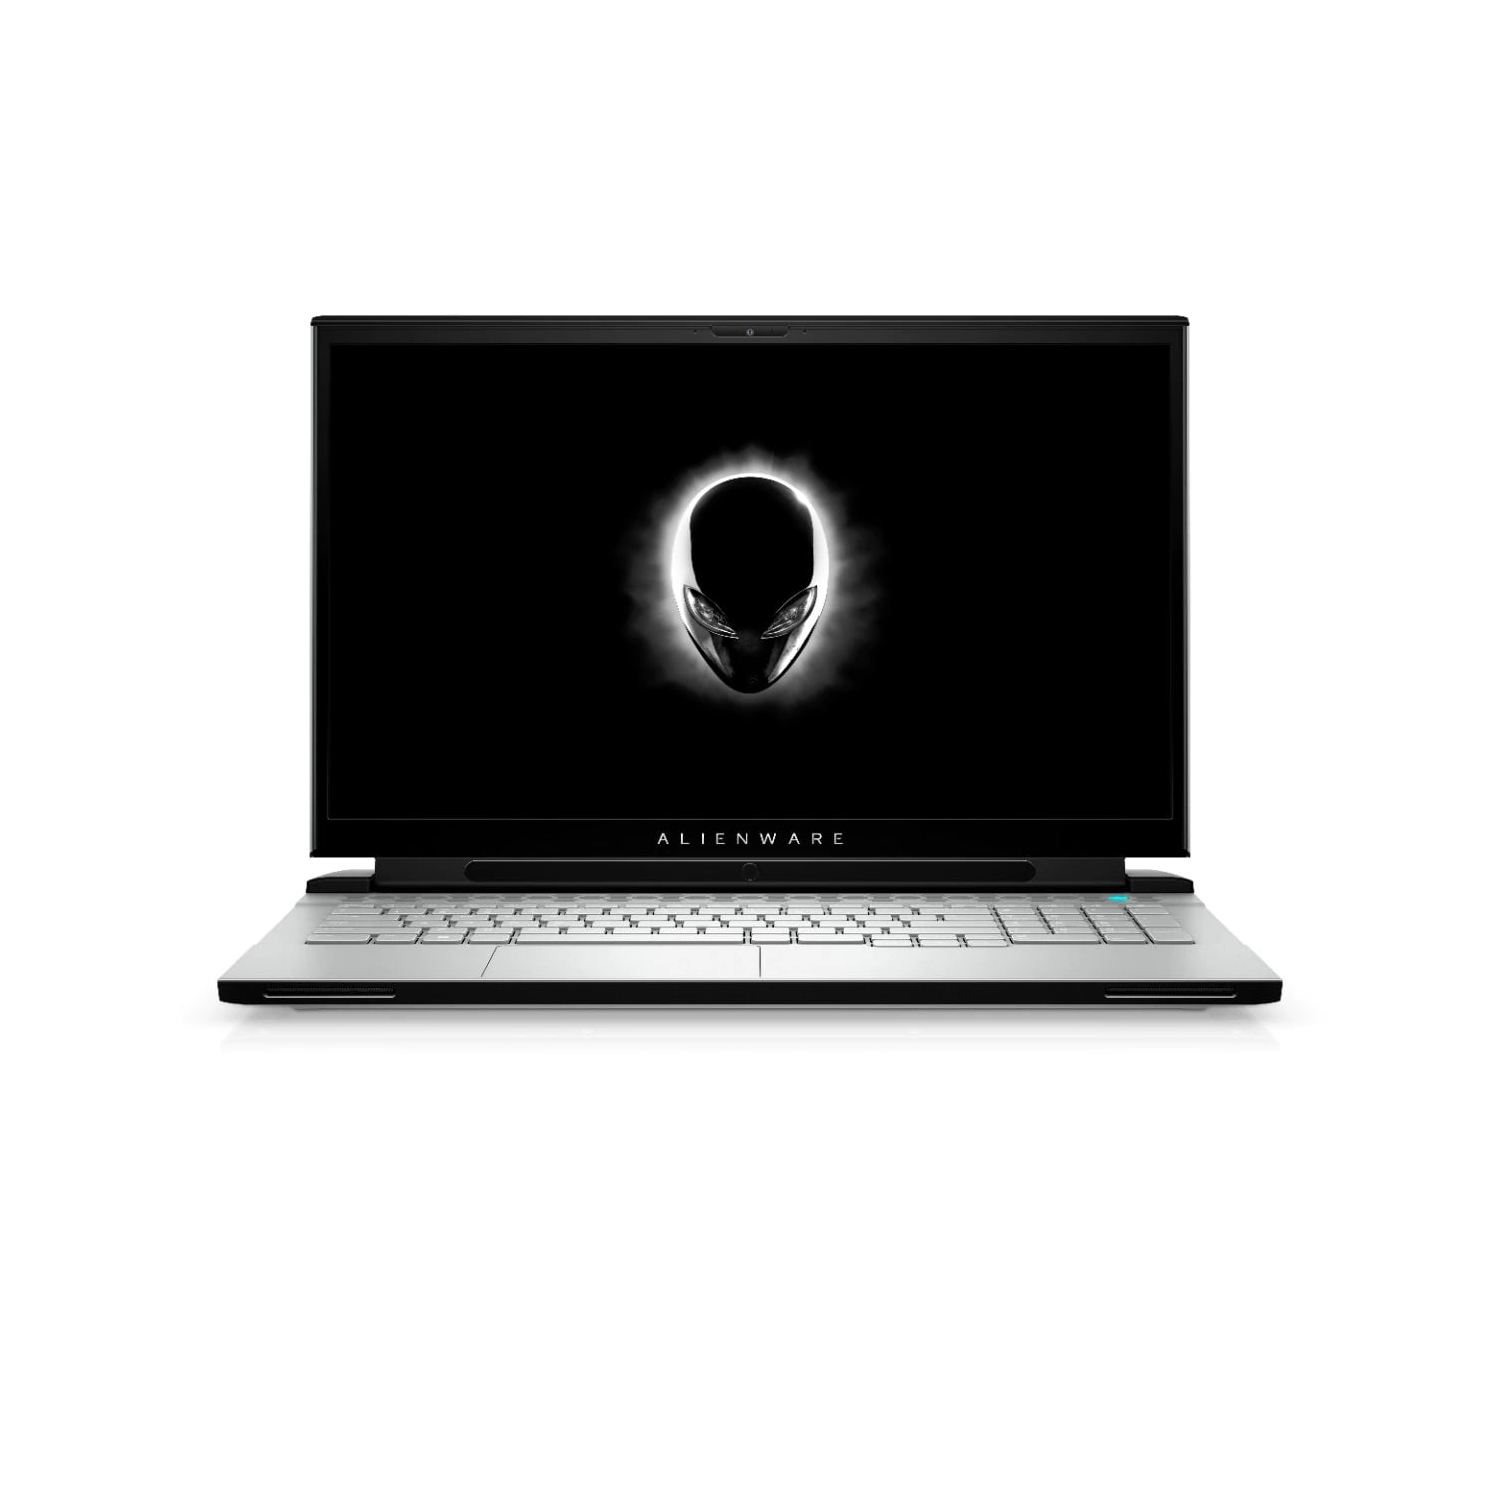 Refurbished (Excellent) - Dell Alienware m17 R3 Gaming Laptop (2020), 17.3" FHD, Core i7, 256GB SSD + 256GB SSD, 16GB RAM, RTX 2070, 5 GHz, 10th Gen CPU Certified